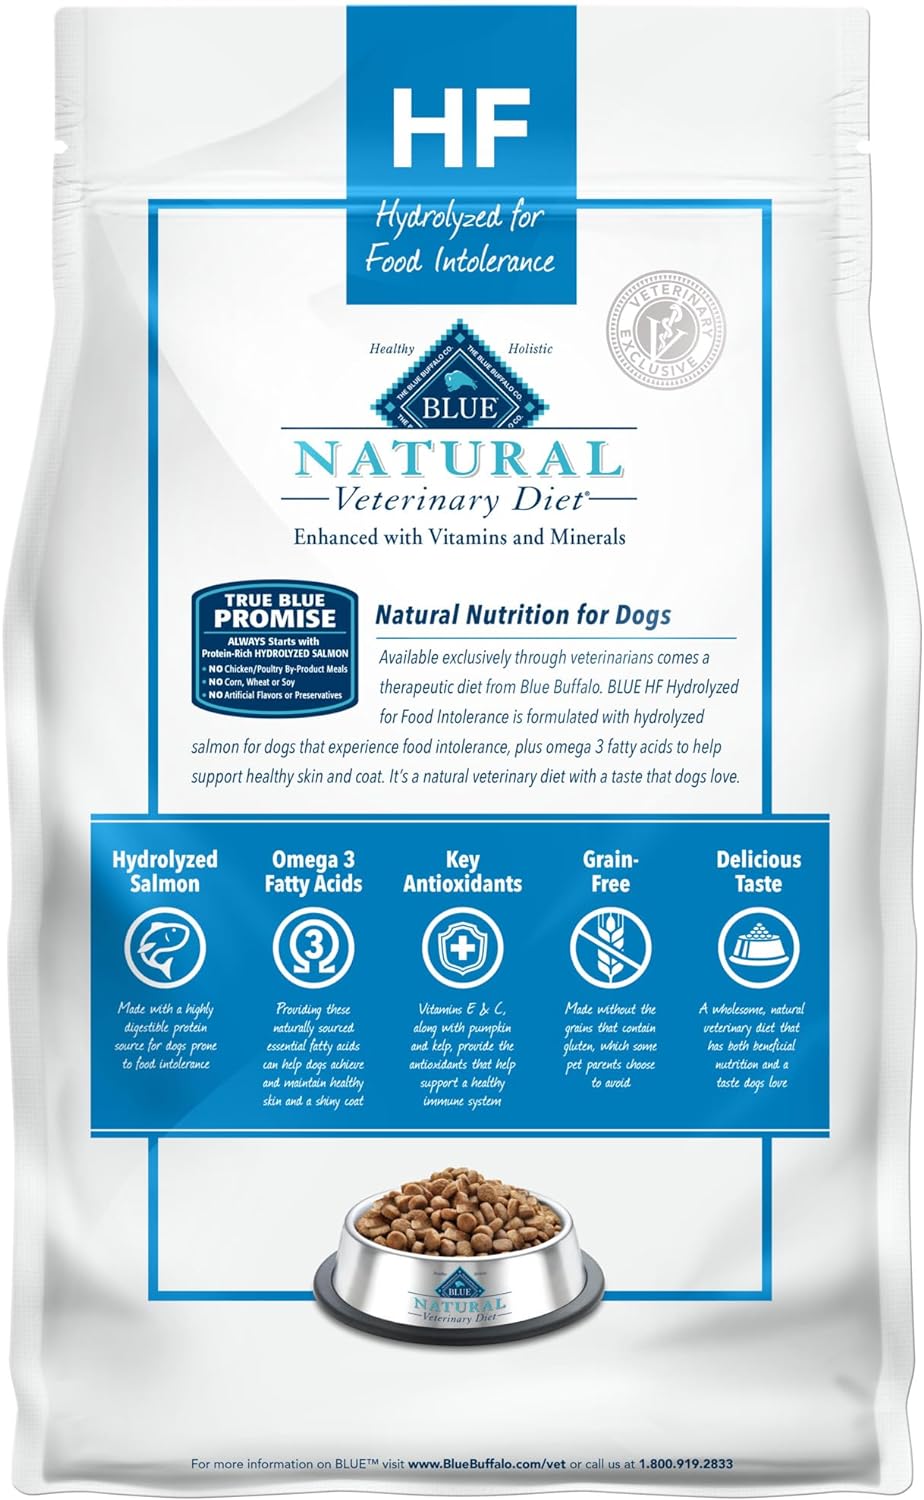 Blue Natural Veterinary Diet HF Hydrolyzed for Food Intolerance Dry Dog Food – Gallery Image 8